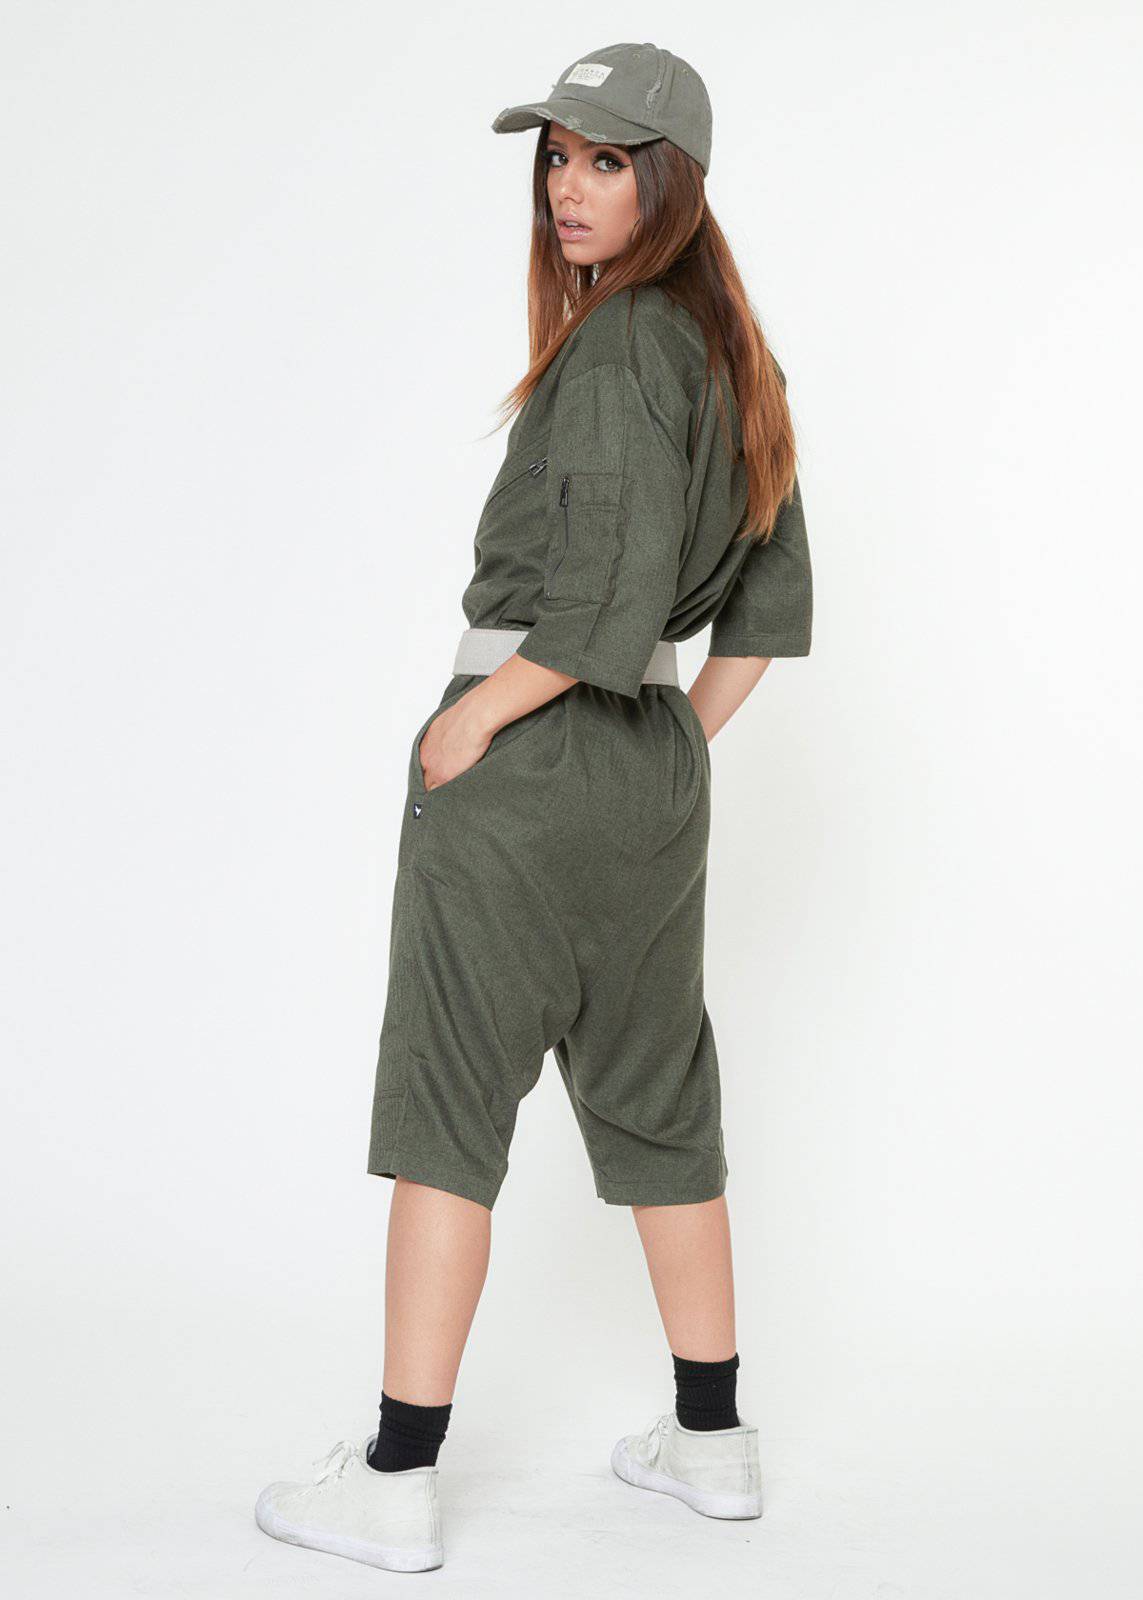 Unisex Short Sleeve Overall With Zipper Pockets In Olive by Shop at Konus